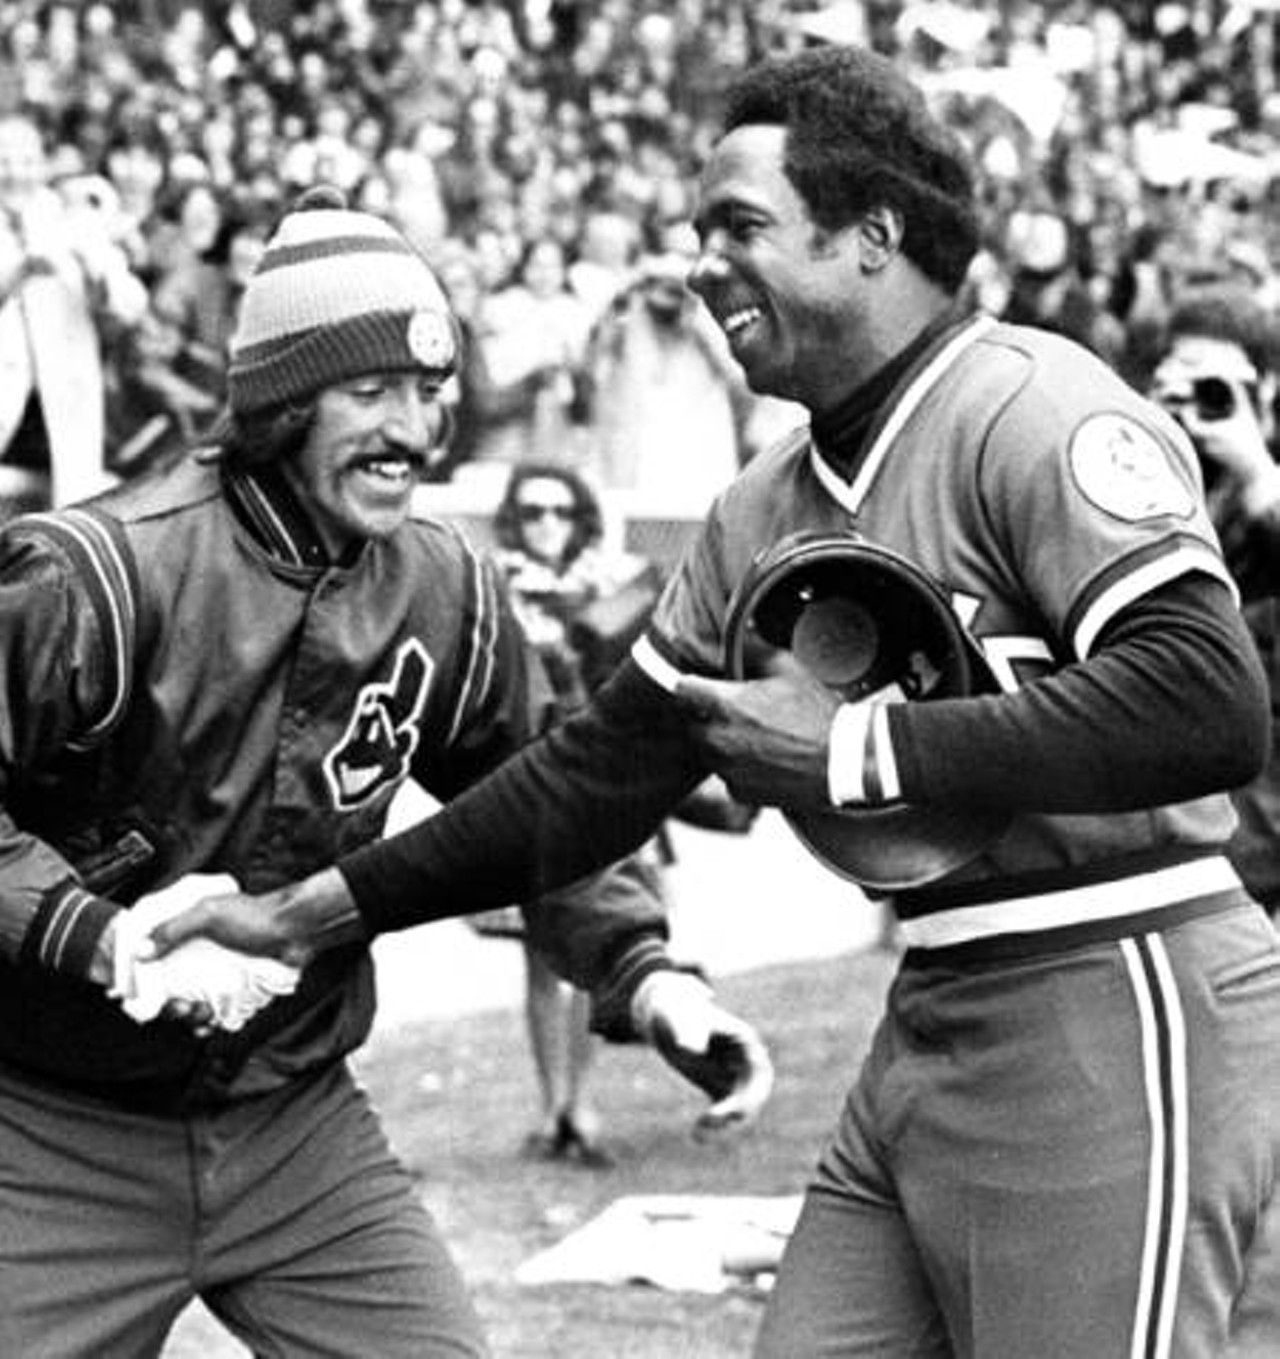 After homering in his first at-bat on Opening Day 1975, Cleveland Indians player-manager Frank Robinson is greeted by Tribe player John Lowenstein.